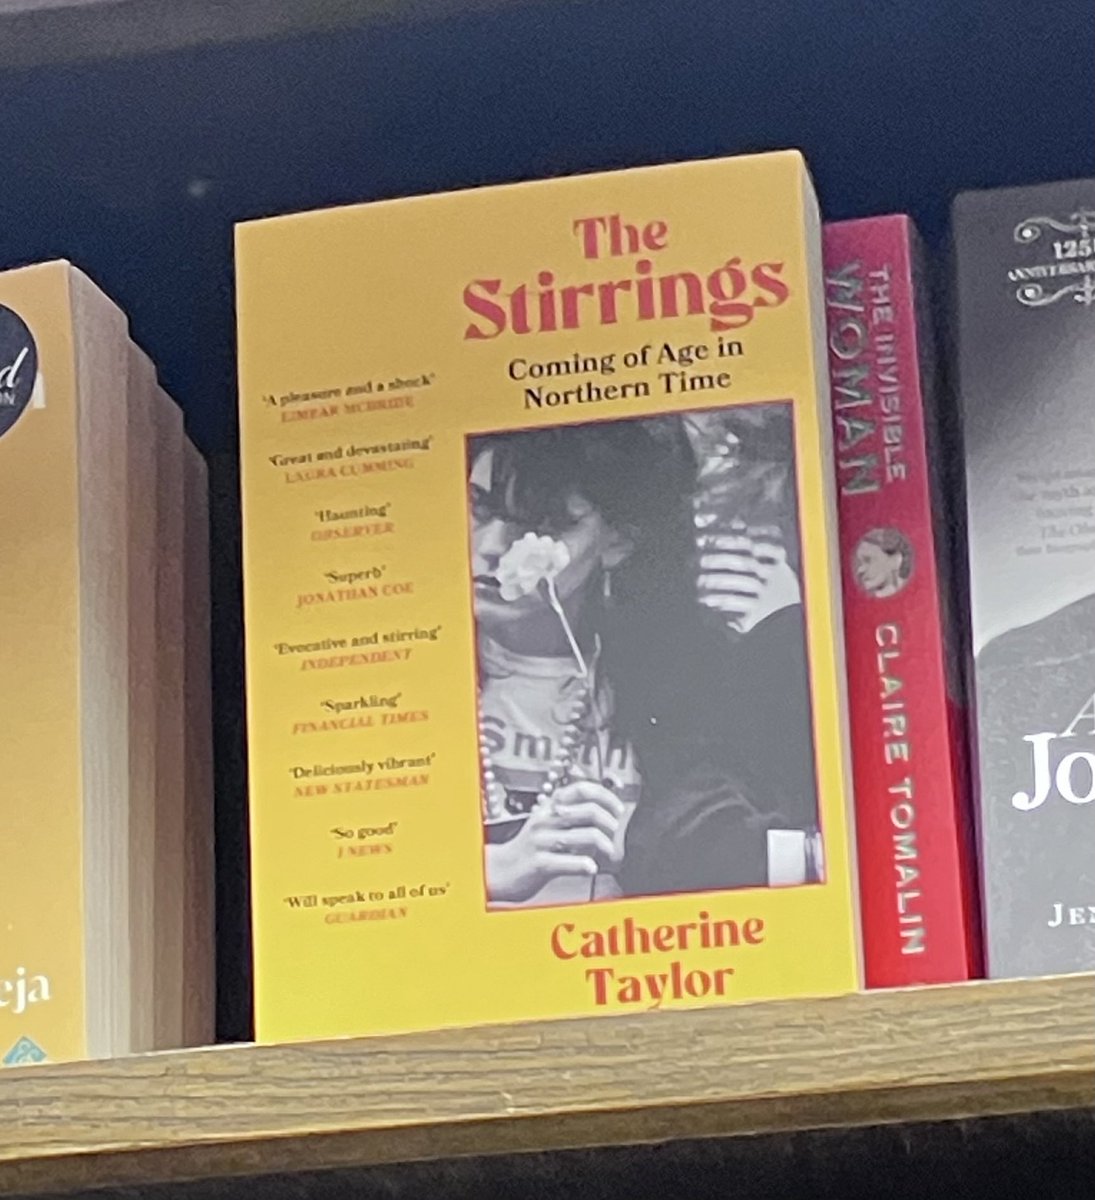 Signed copies of #TheStirrings now available ⁦@heffersbookshop⁩ - with thanks to bookseller Ewan! #Cambridge